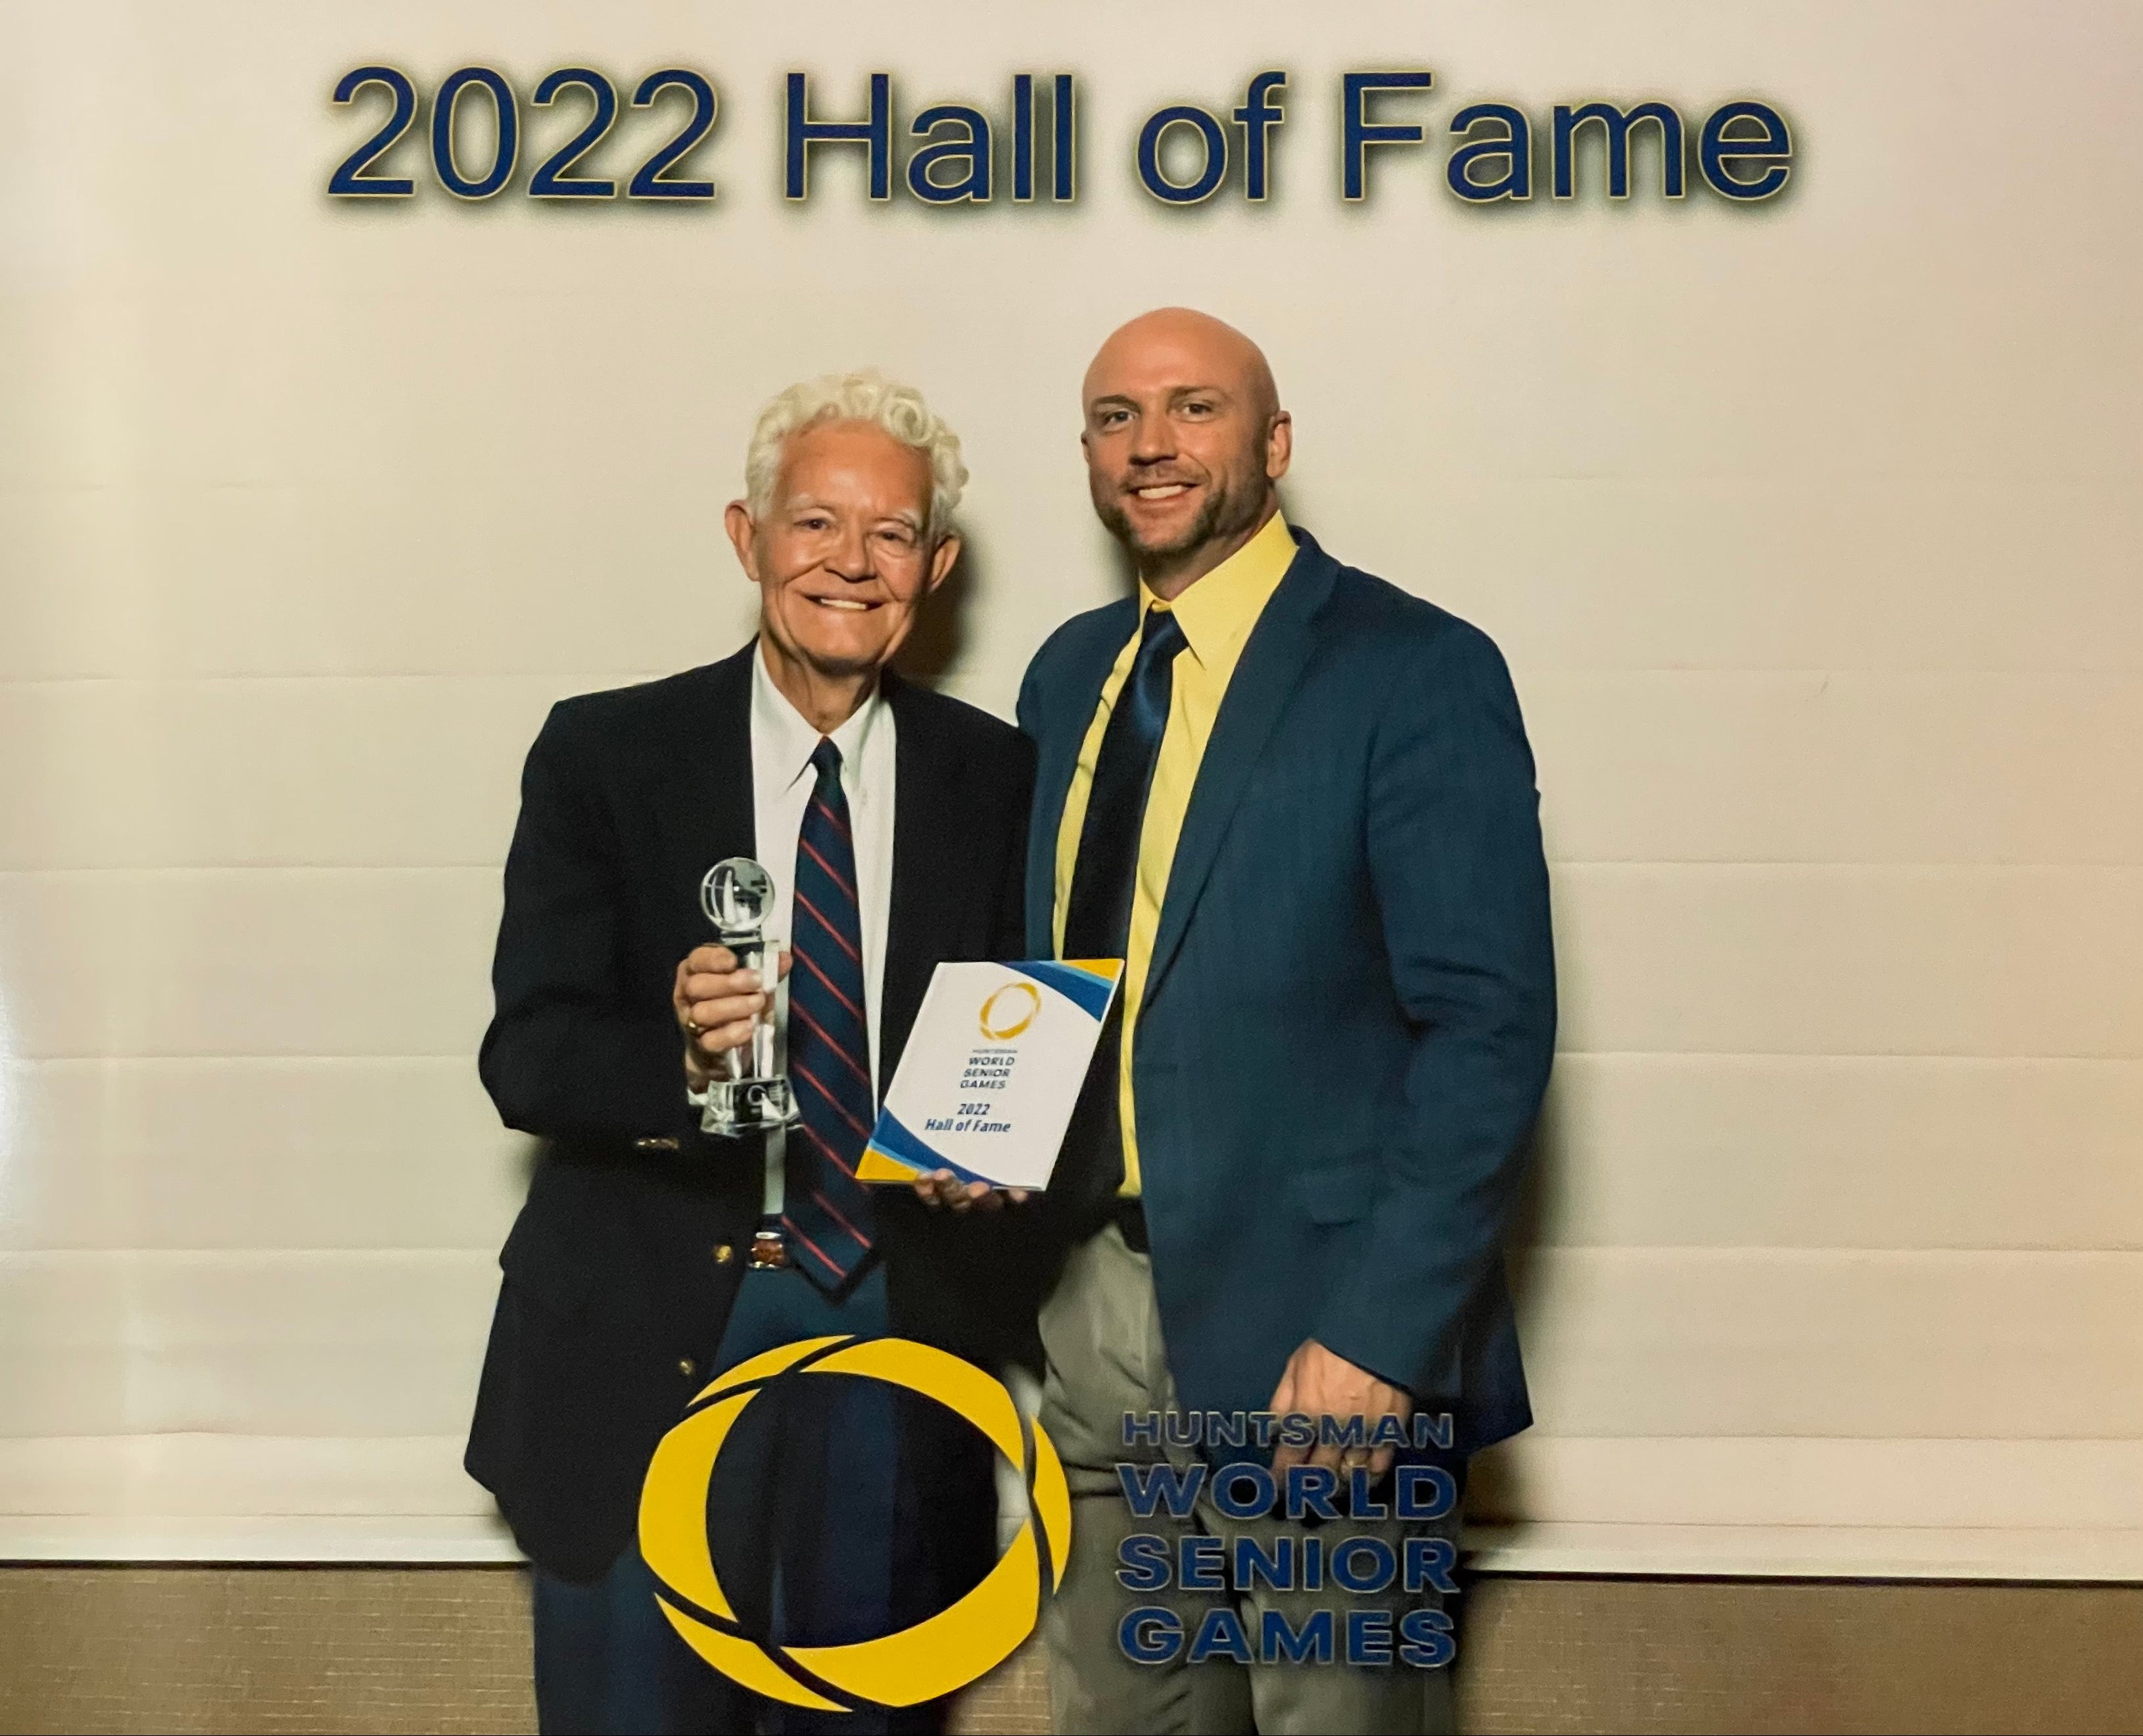 Johnson at the 2022 Hall of Fame Ceremony